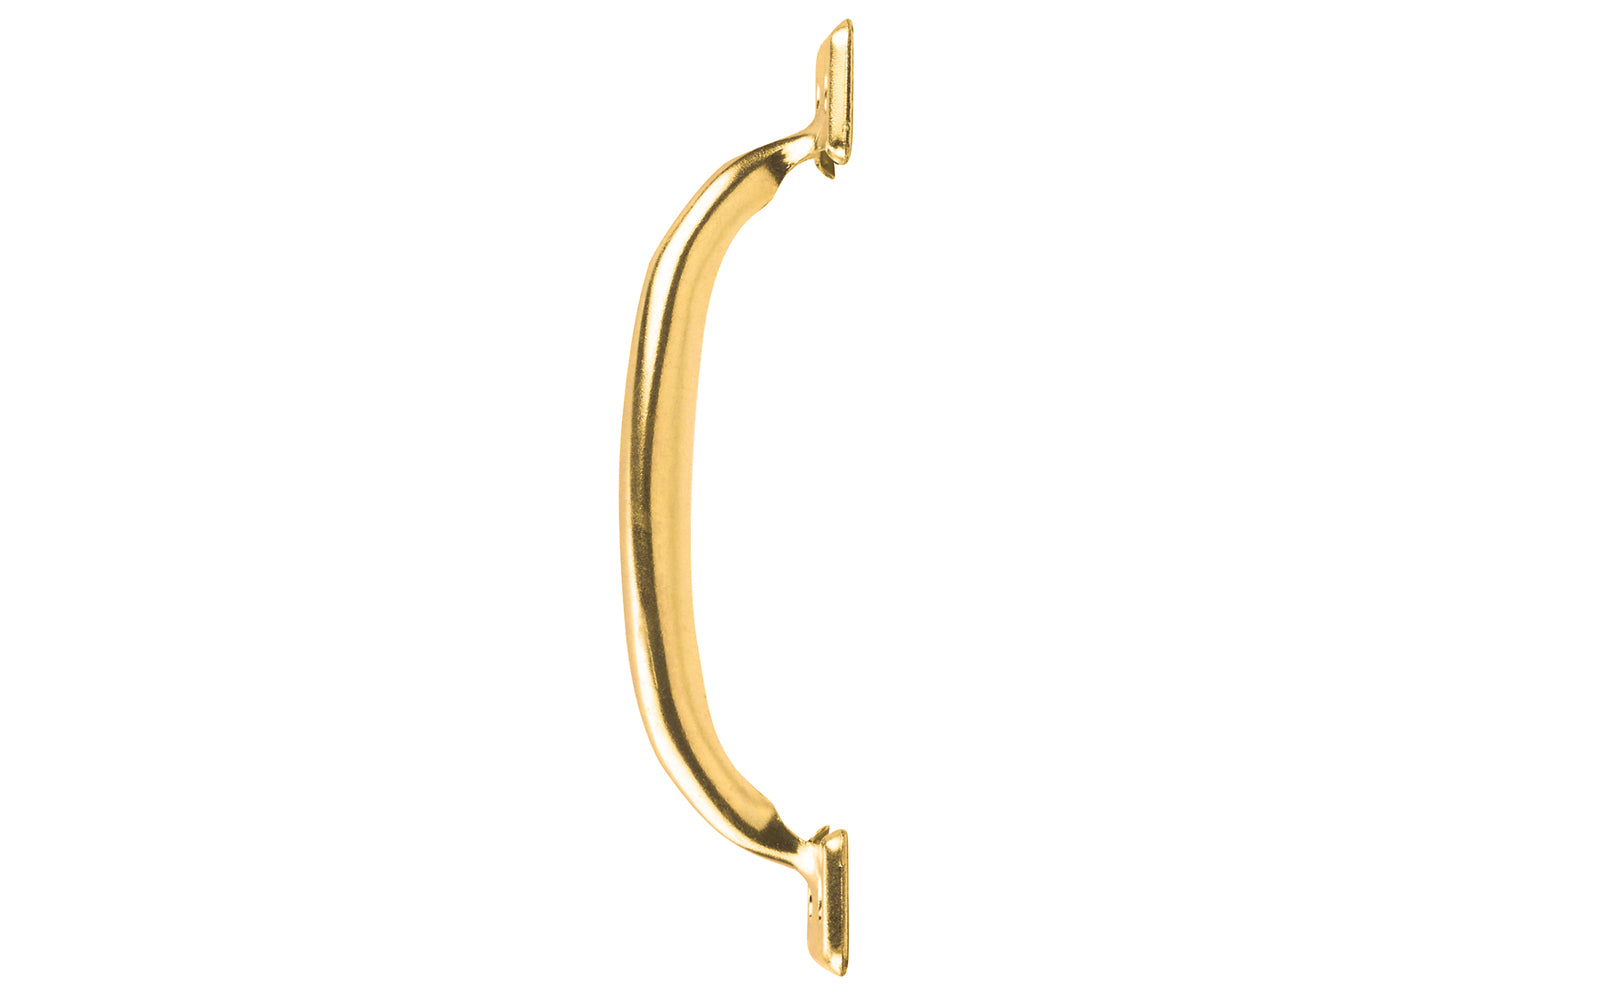 This brass-plated utility pull is designed for general use on drawers, doors, & a variety of other applications. Includes fasteners. Made of steel material with brass plated finish. Available 5-3/4" overall size & 6-1/2" overall sizes.